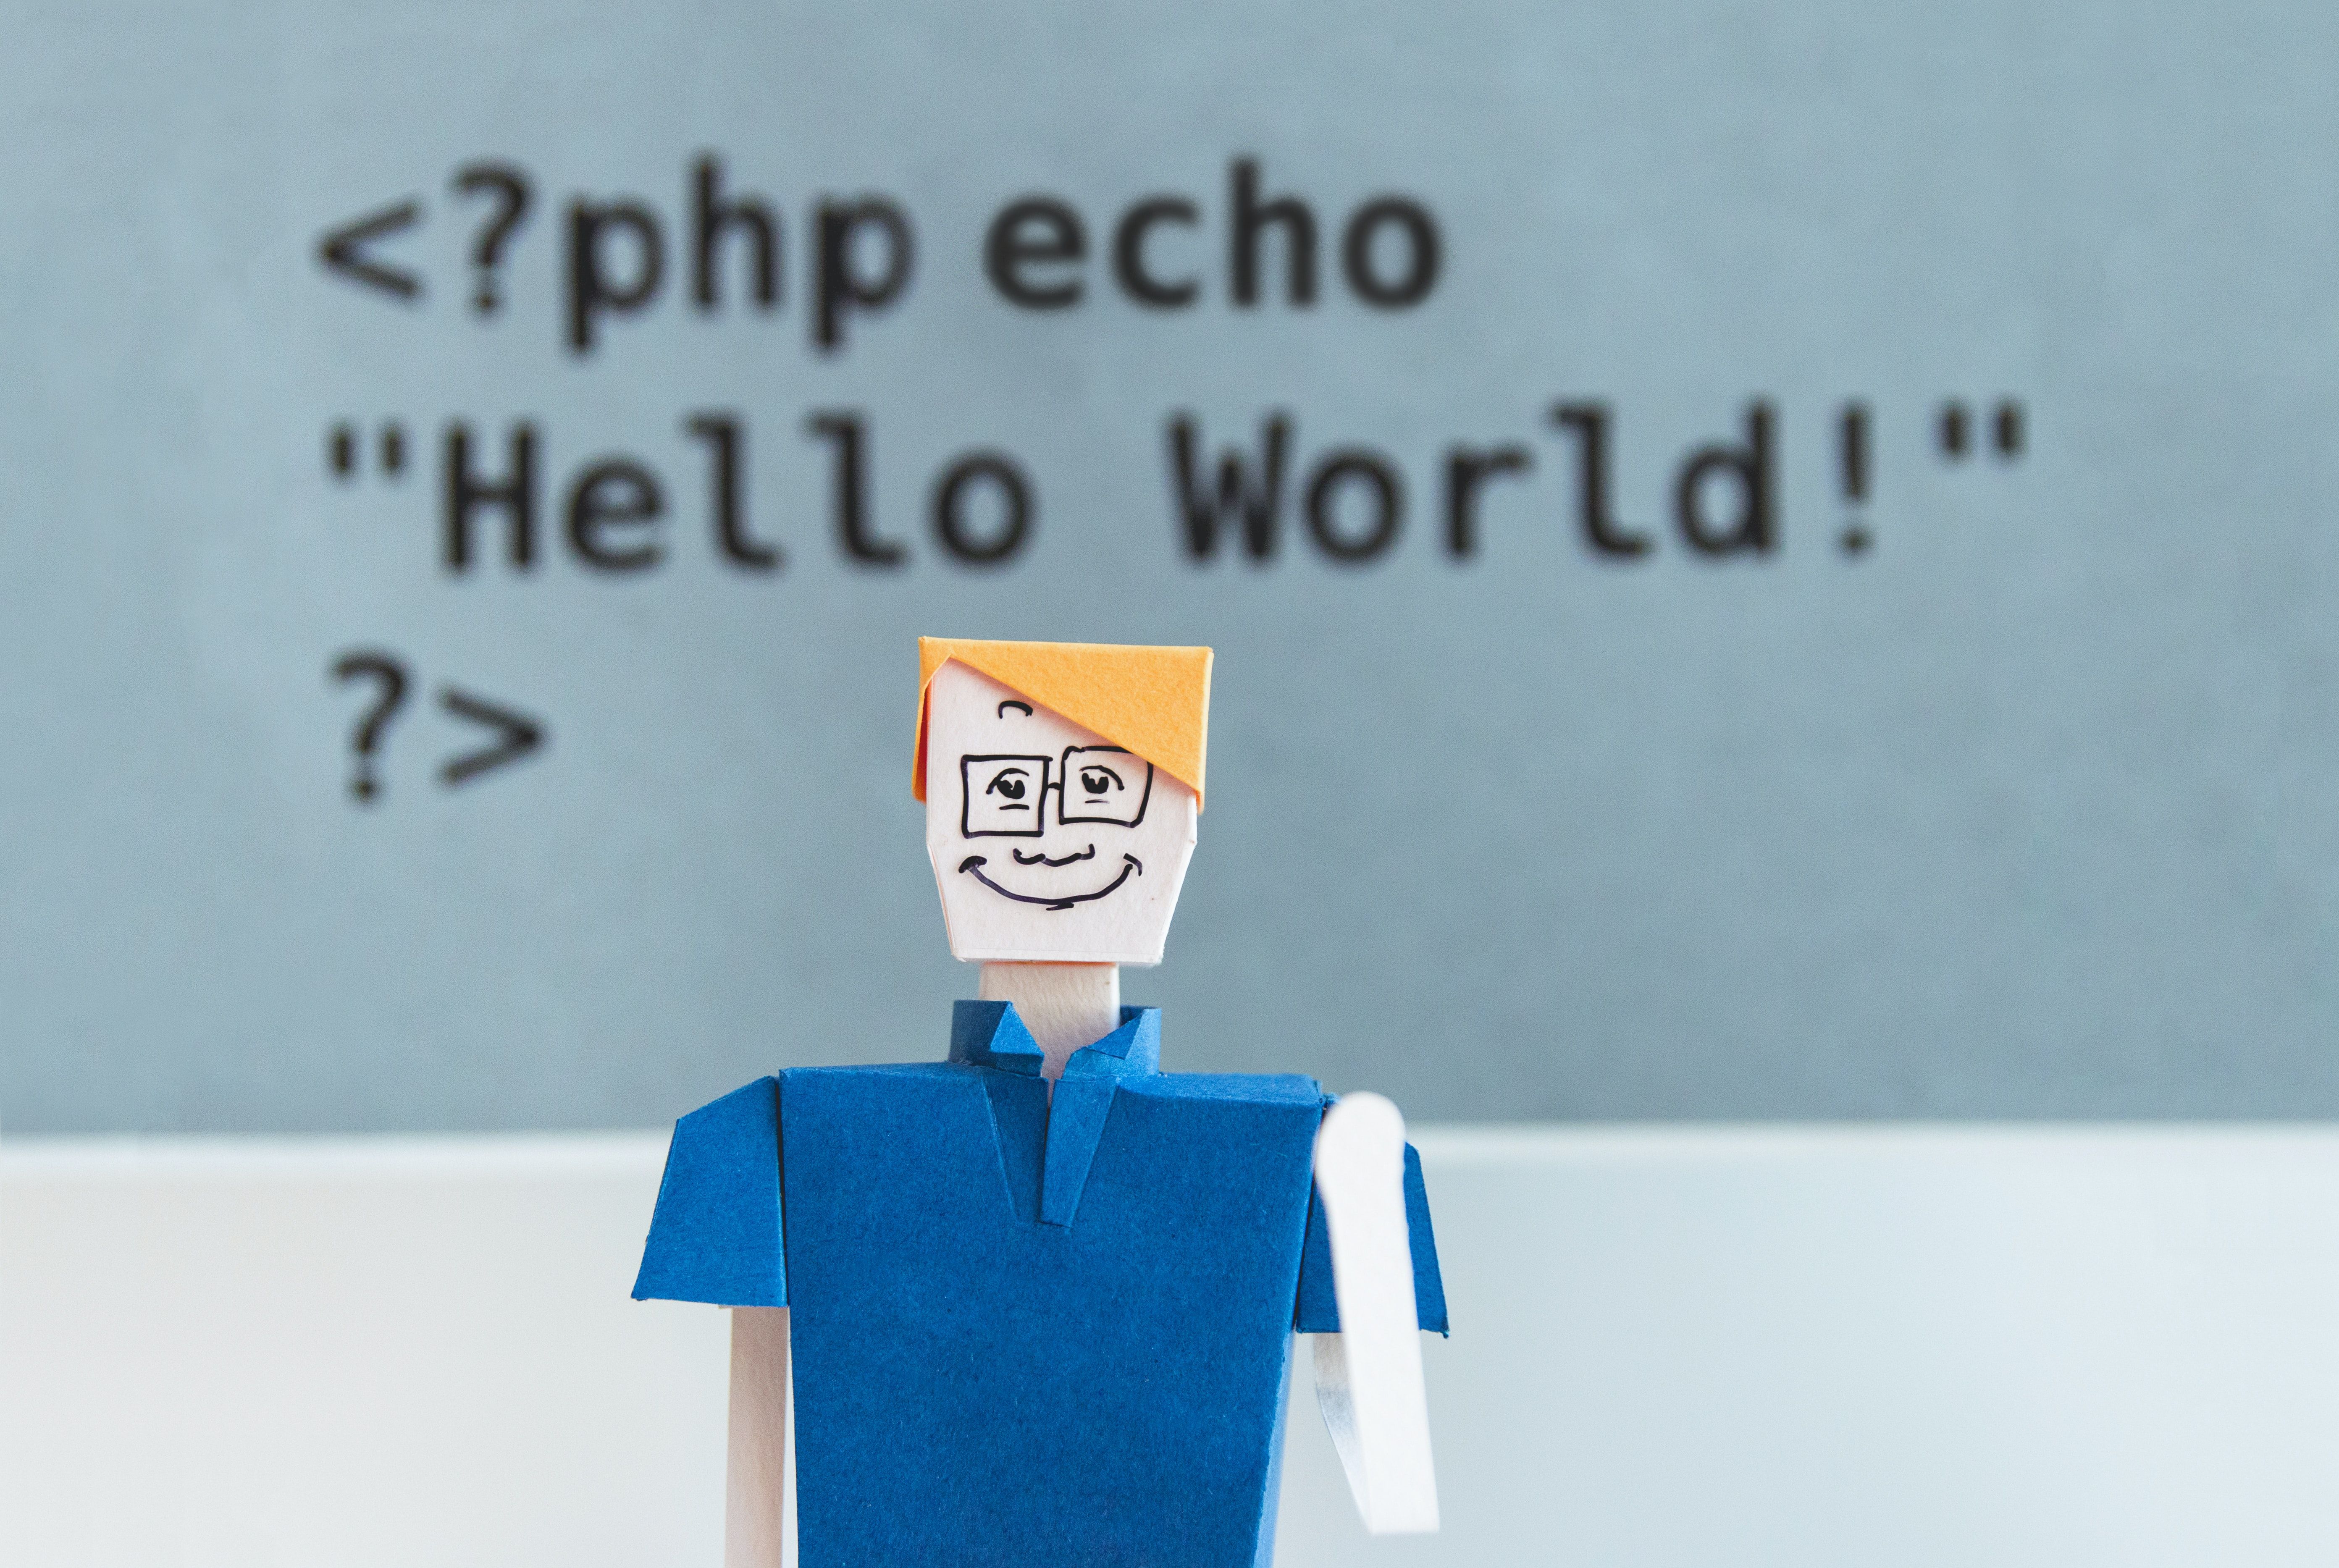 Photo of a paper doll man wearing a blue shirt smiling almost reluctantly at the camera, with PHP code written on the wall behind him